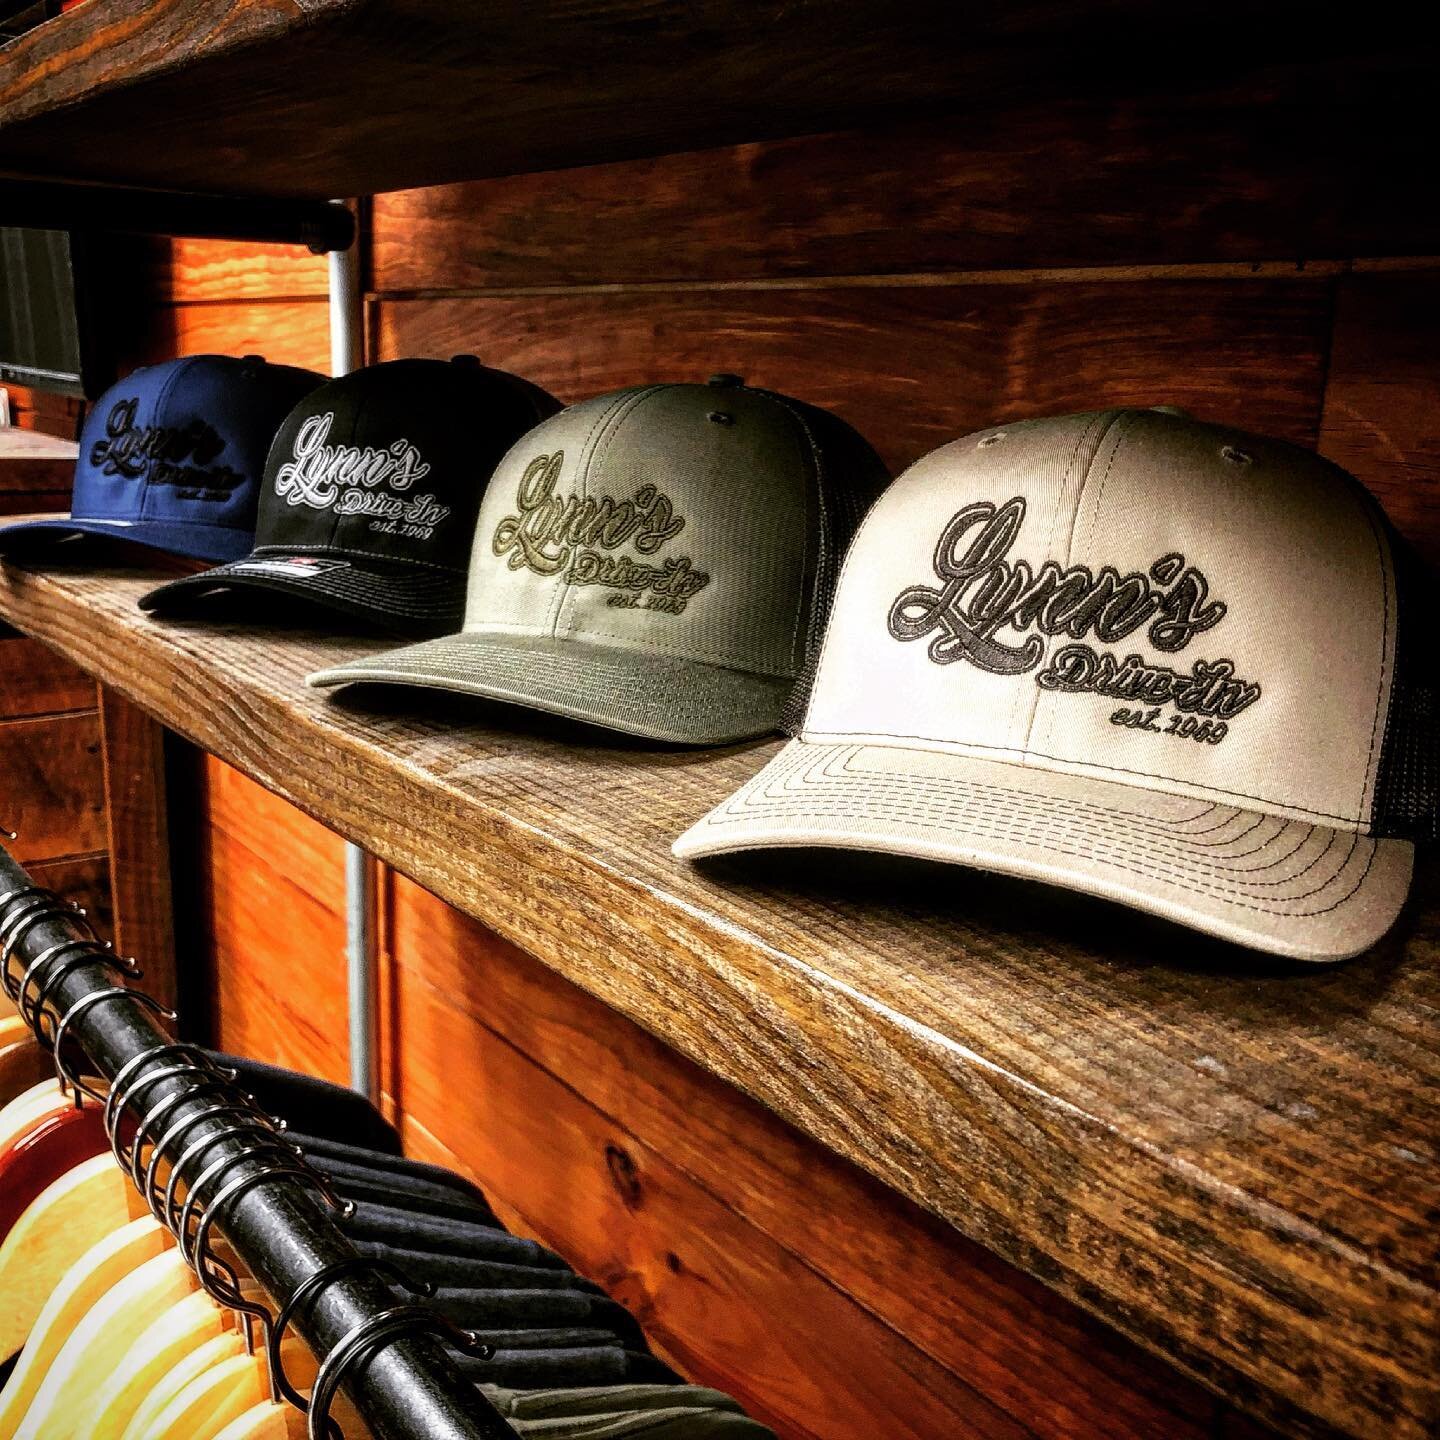 These hats came out 🔥 
If you need embroidery done we can do it my friend! Call us/ message us/ messenger bird, etc we gotya!